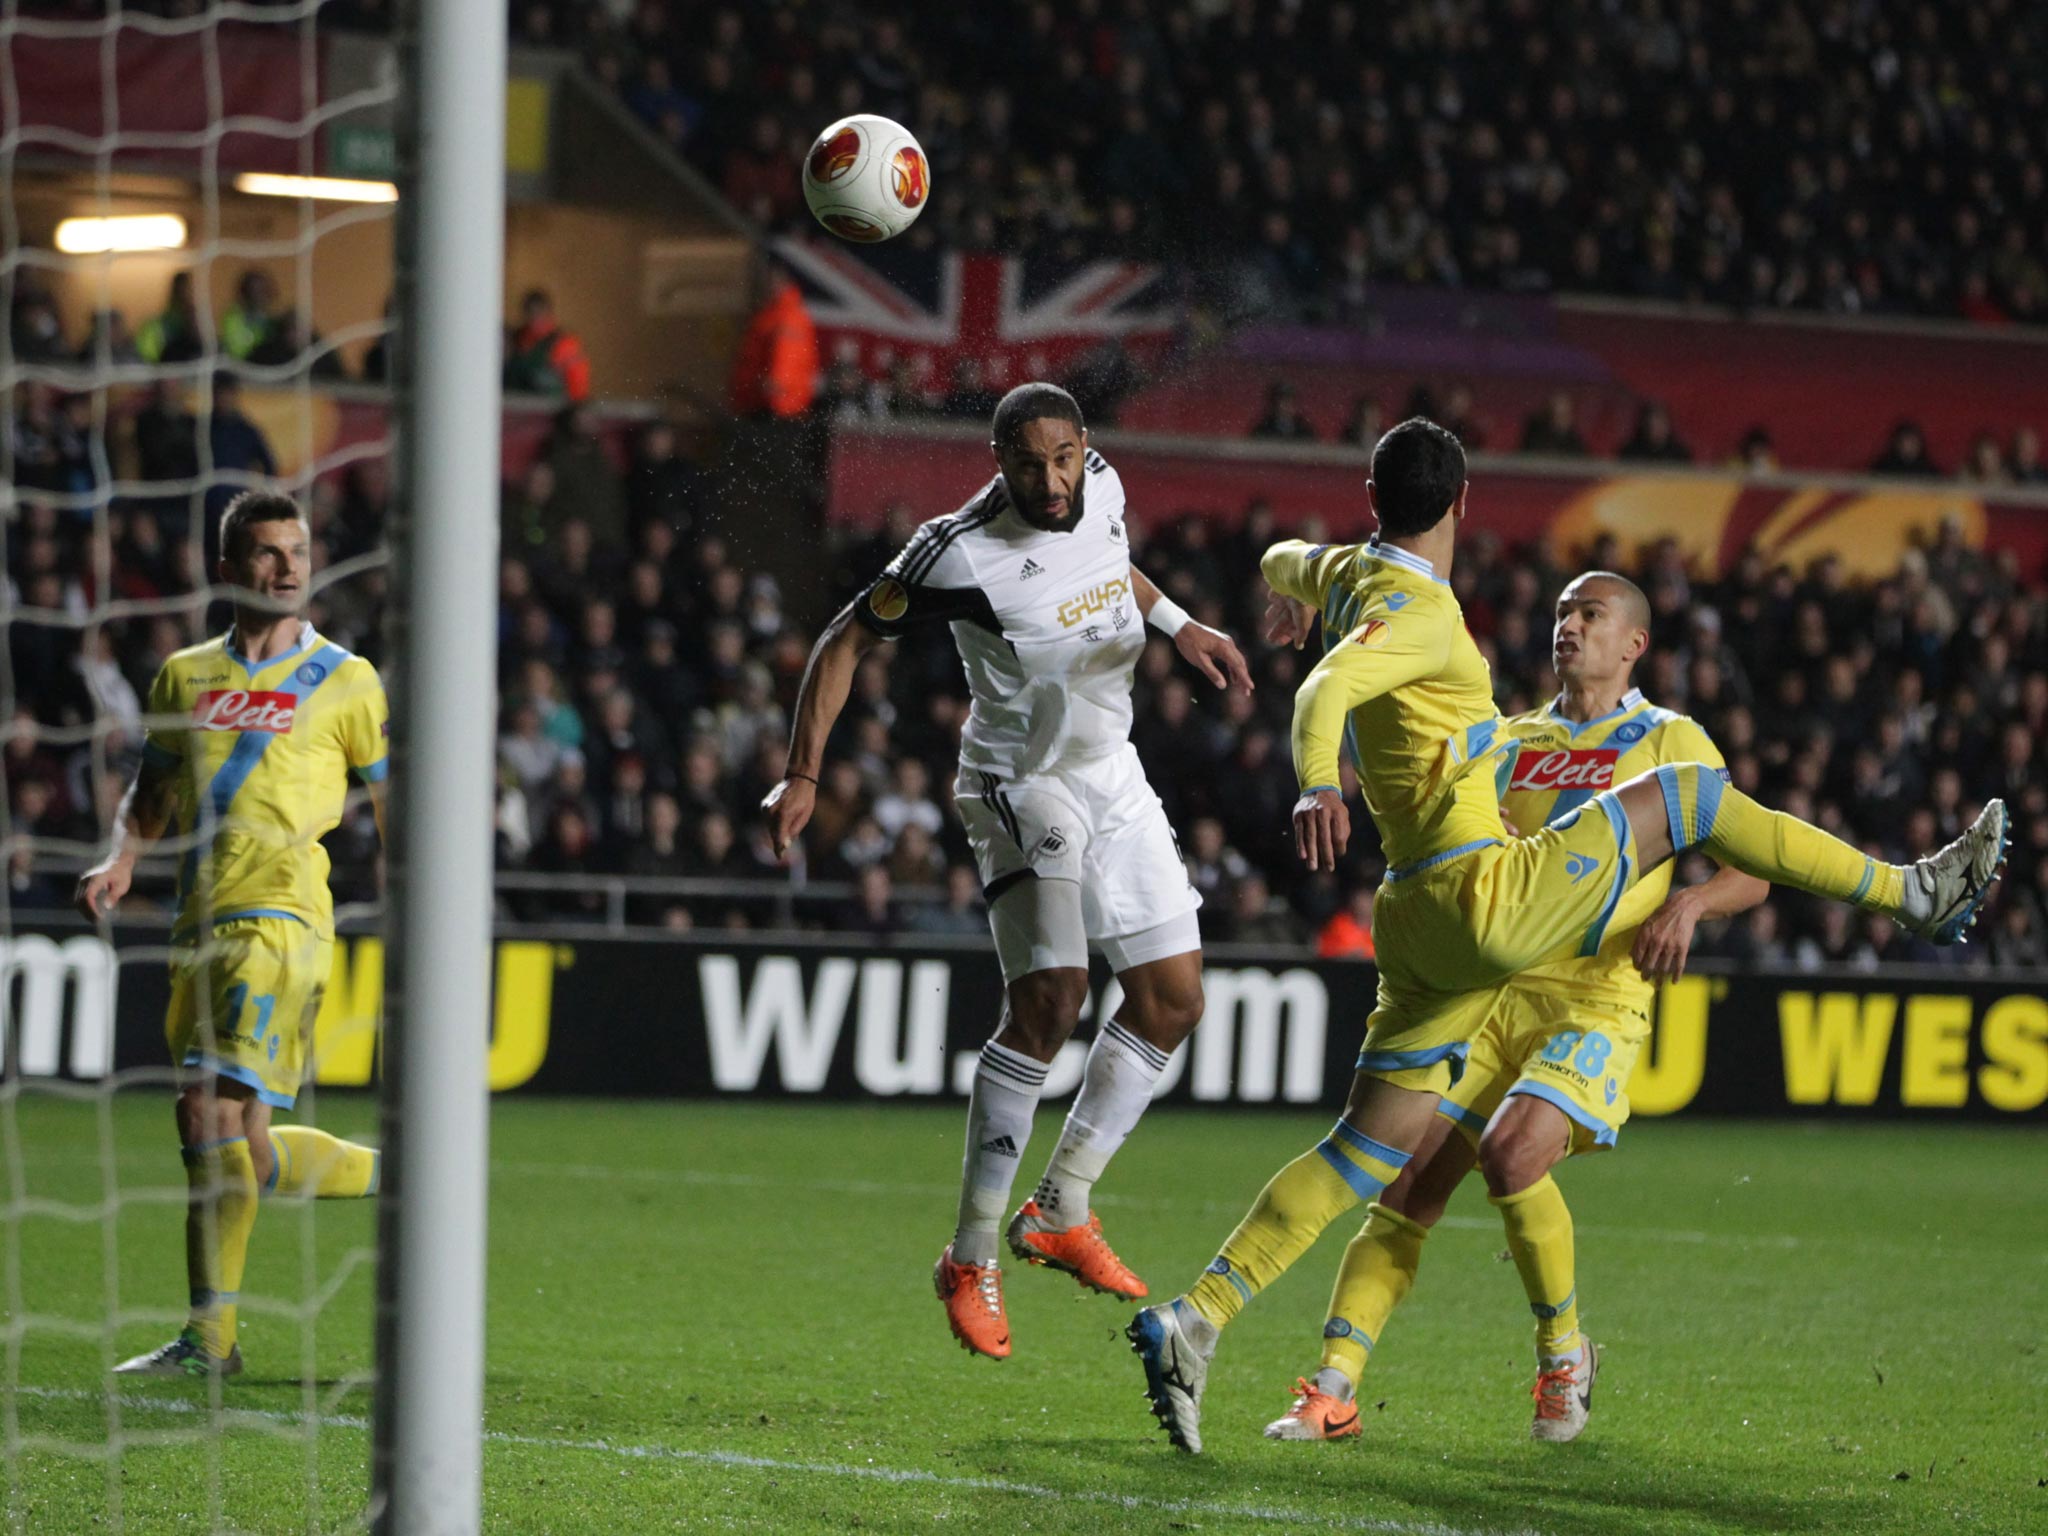 Swansea City's Ashley Williams header is saved by Napoli goalkeeper Pepe Reina (out of shot) during the UEFA Europa League